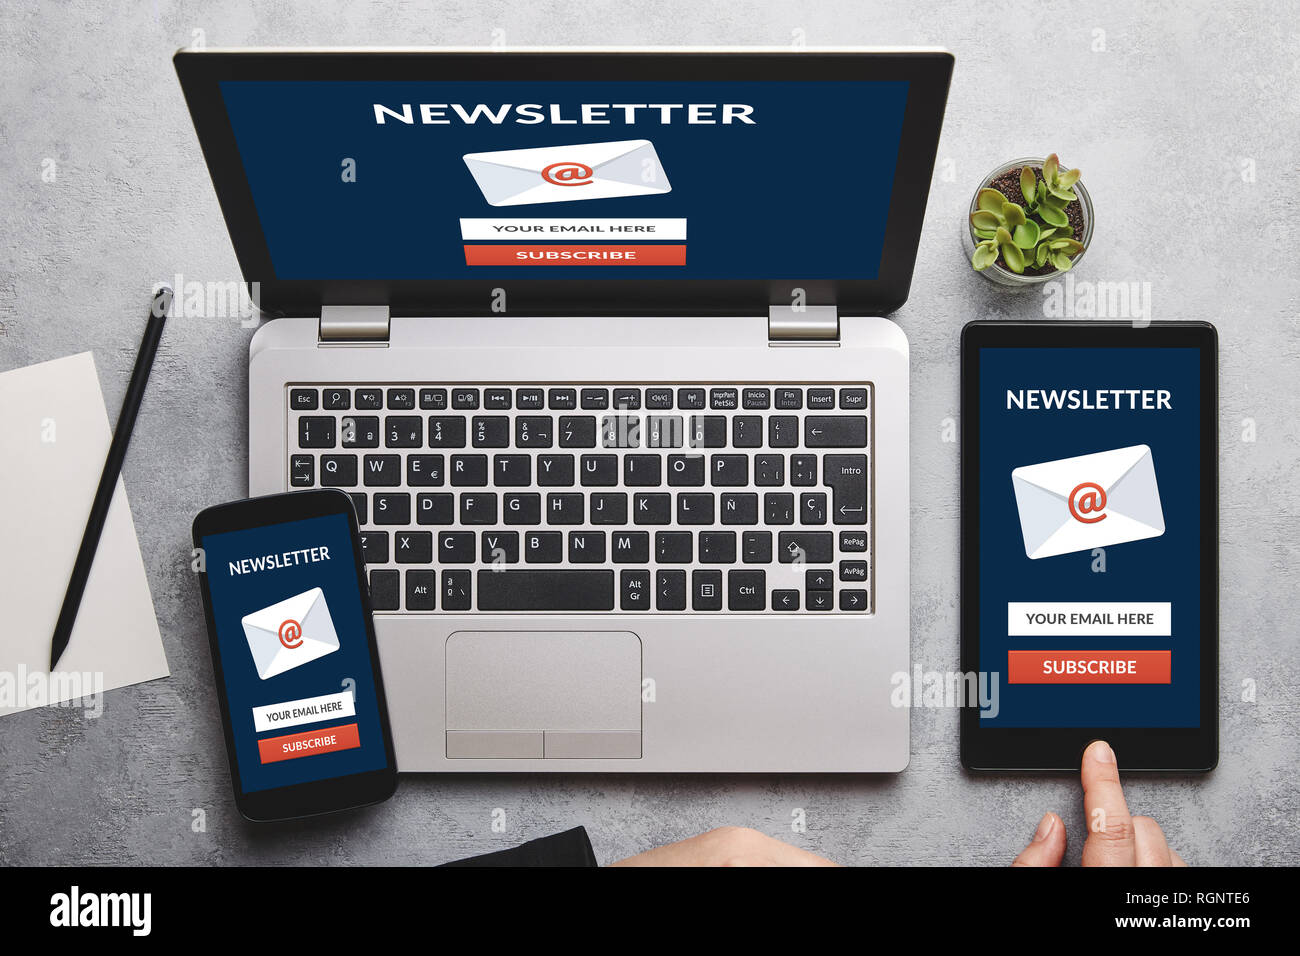 Subscribe newsletter concept on laptop, tablet and smartphone screen over gray table. All screen content is designed by me. Flat lay Stock Photo